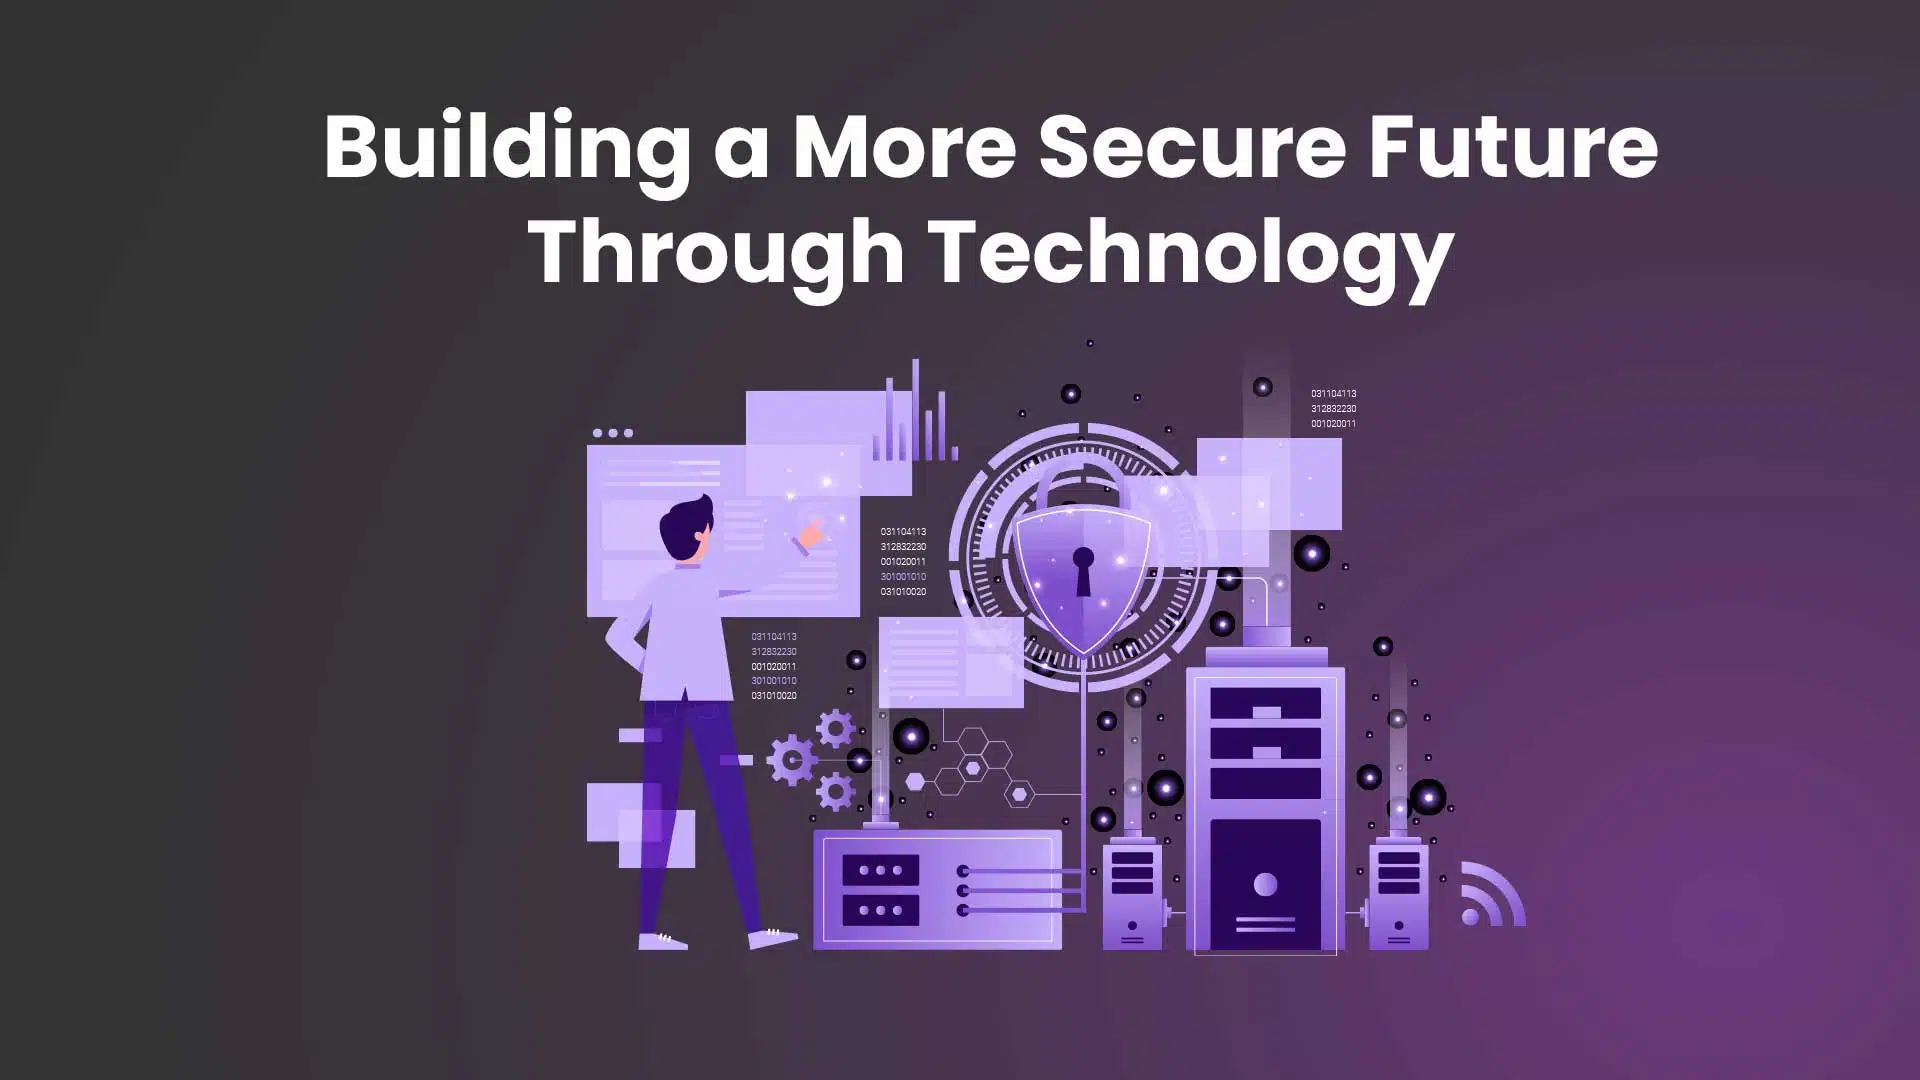 Smart Hatch Technologies - Social and security solutions through technology